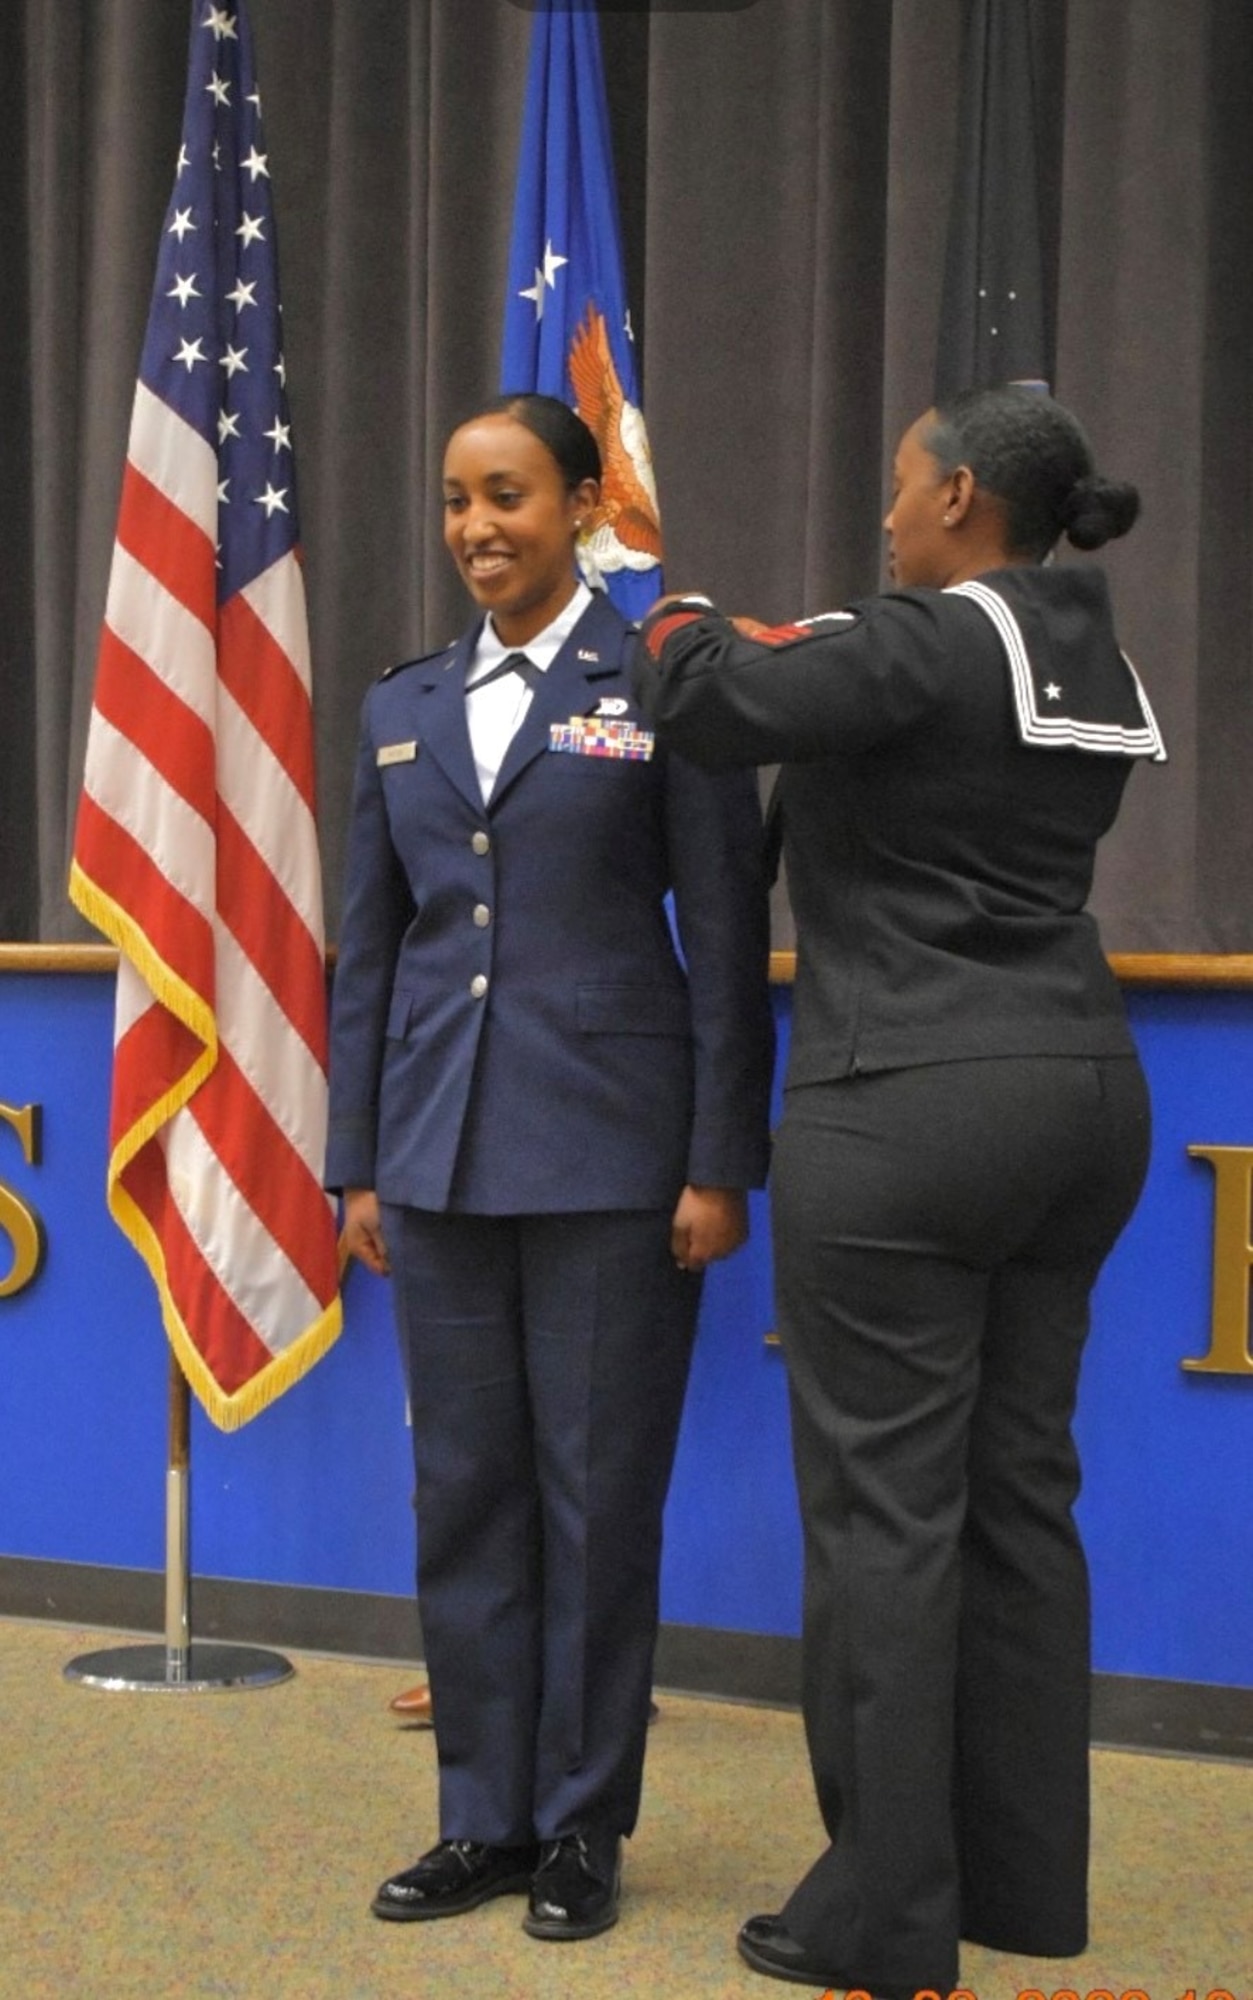 2nd Lt. Mary Andom gets pinned with her new rank by her sister.